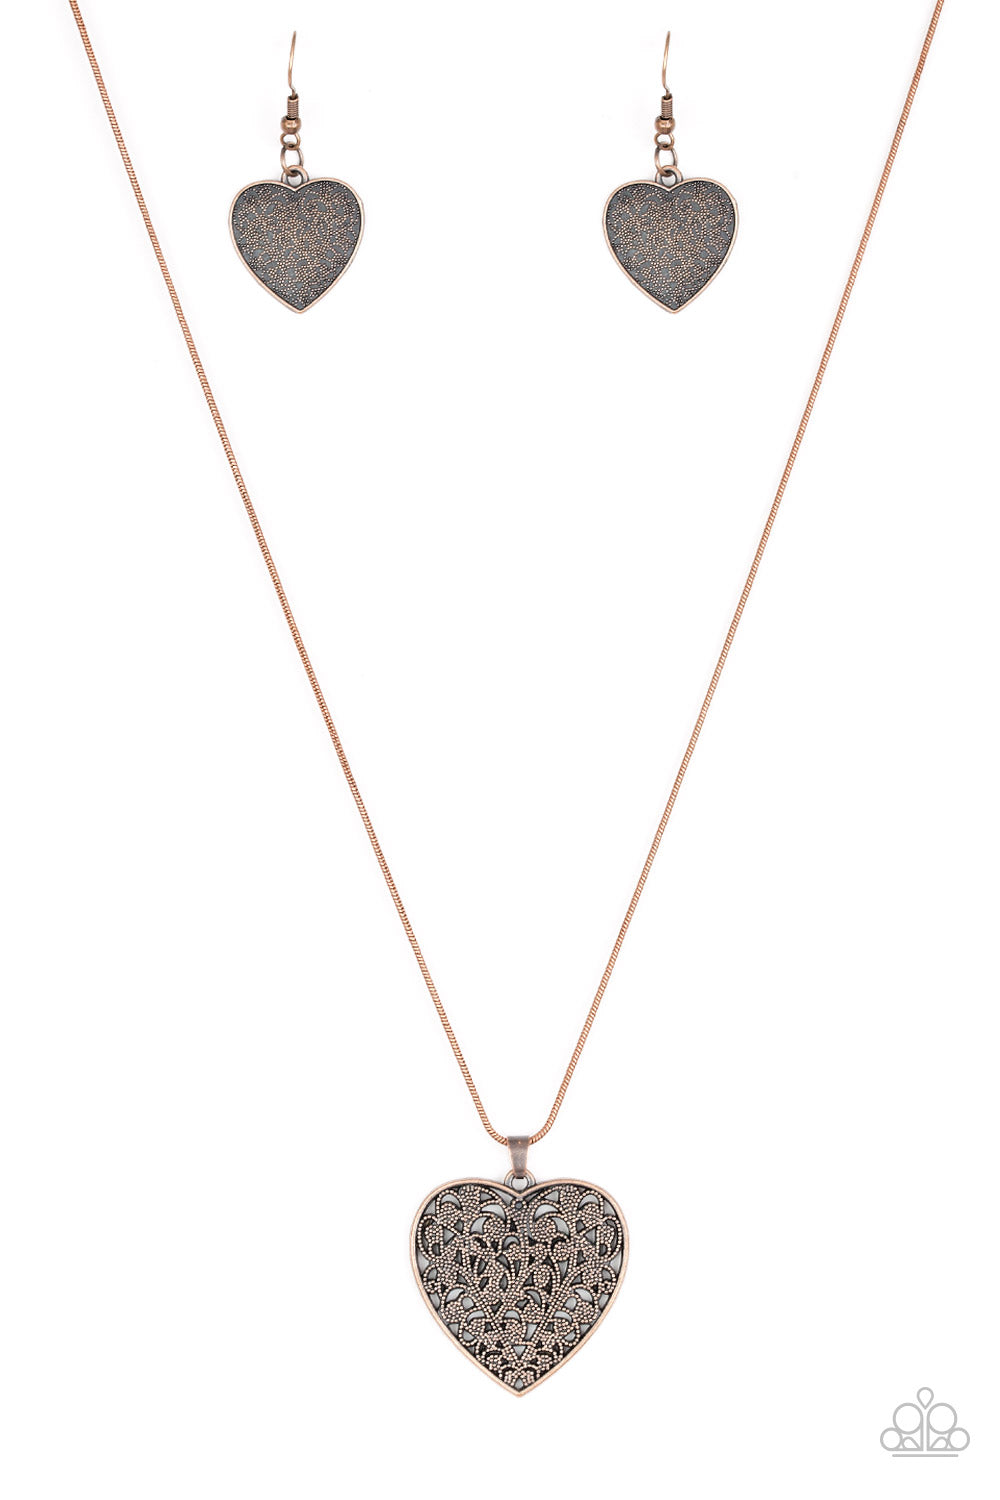 Paparazzi Look Into Your Heart Copper Short Necklace - P2WH-CPXX-136XX